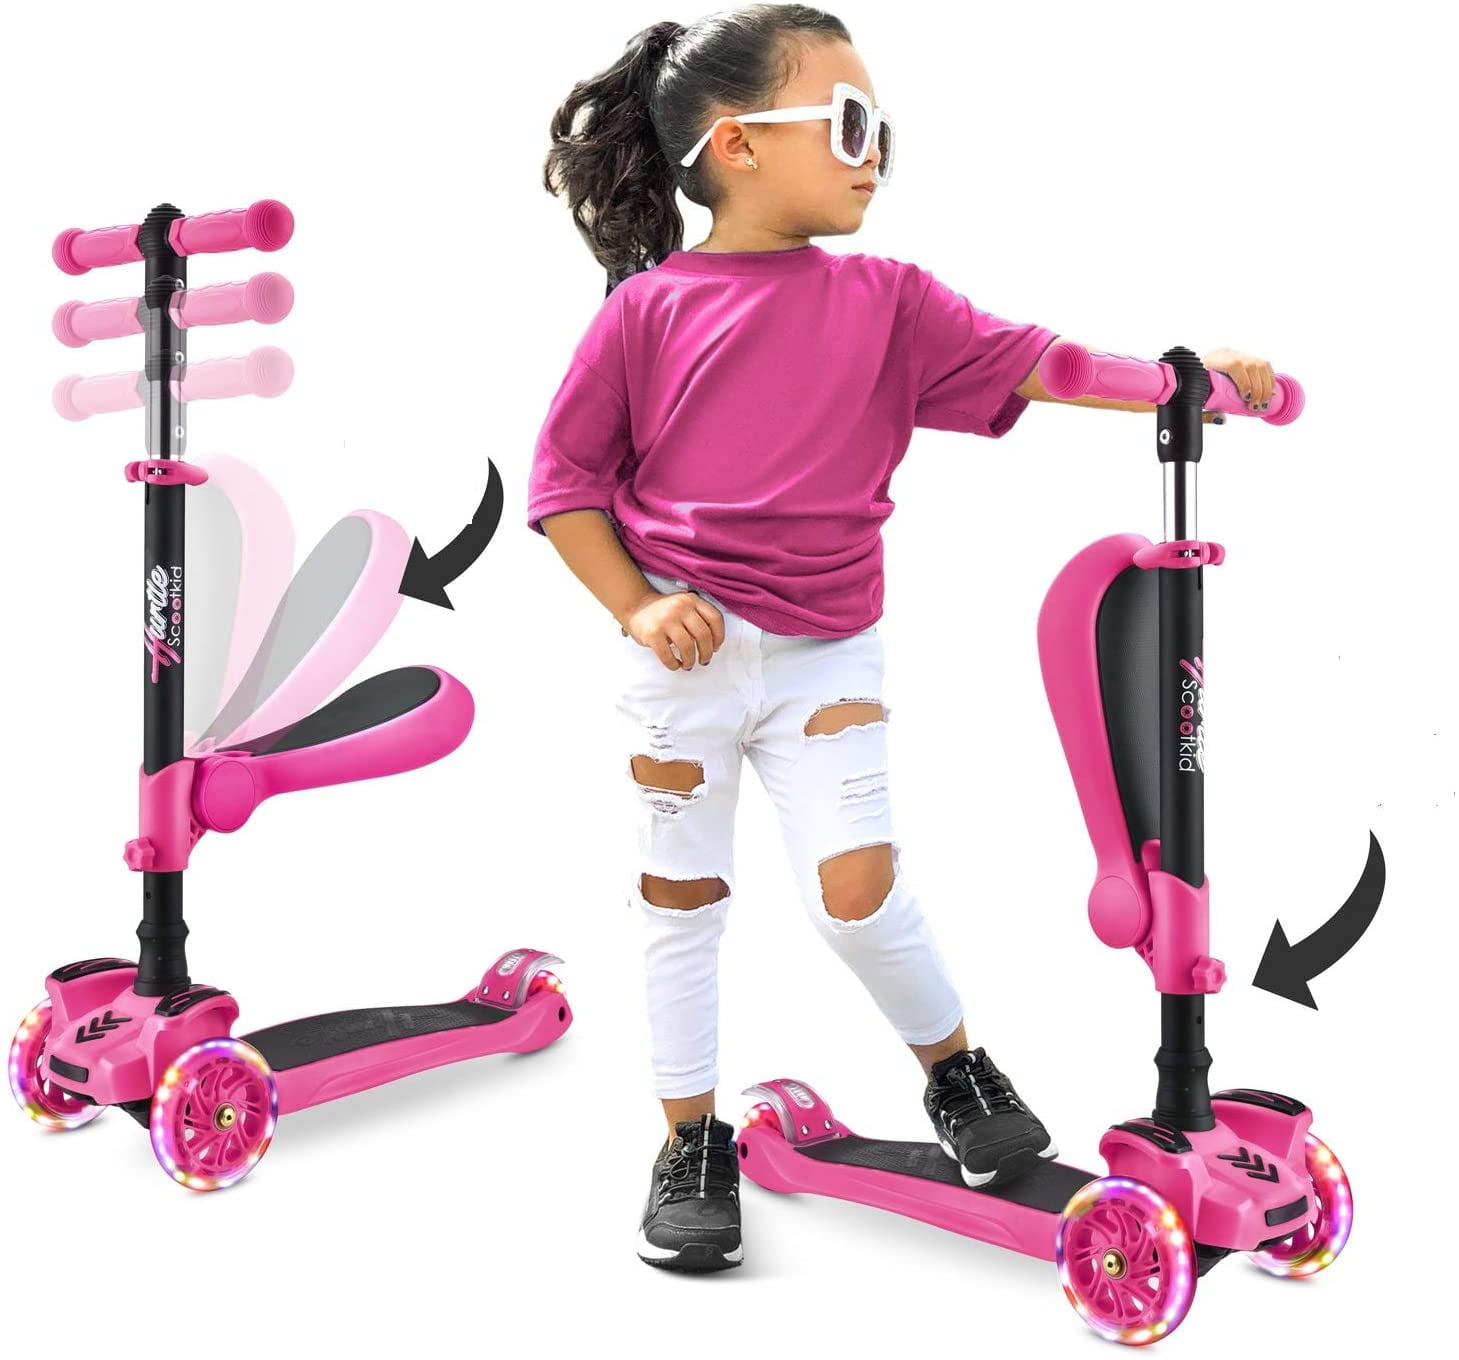 Kids Scooter for Boys Girls 3 Wheels Kick Scooters with Flashing Multi-Coloured Led Light Up Wheels and Foldable Height Adjustable Handlebar for Ages 3-12 Years Old Toddler Baby Child